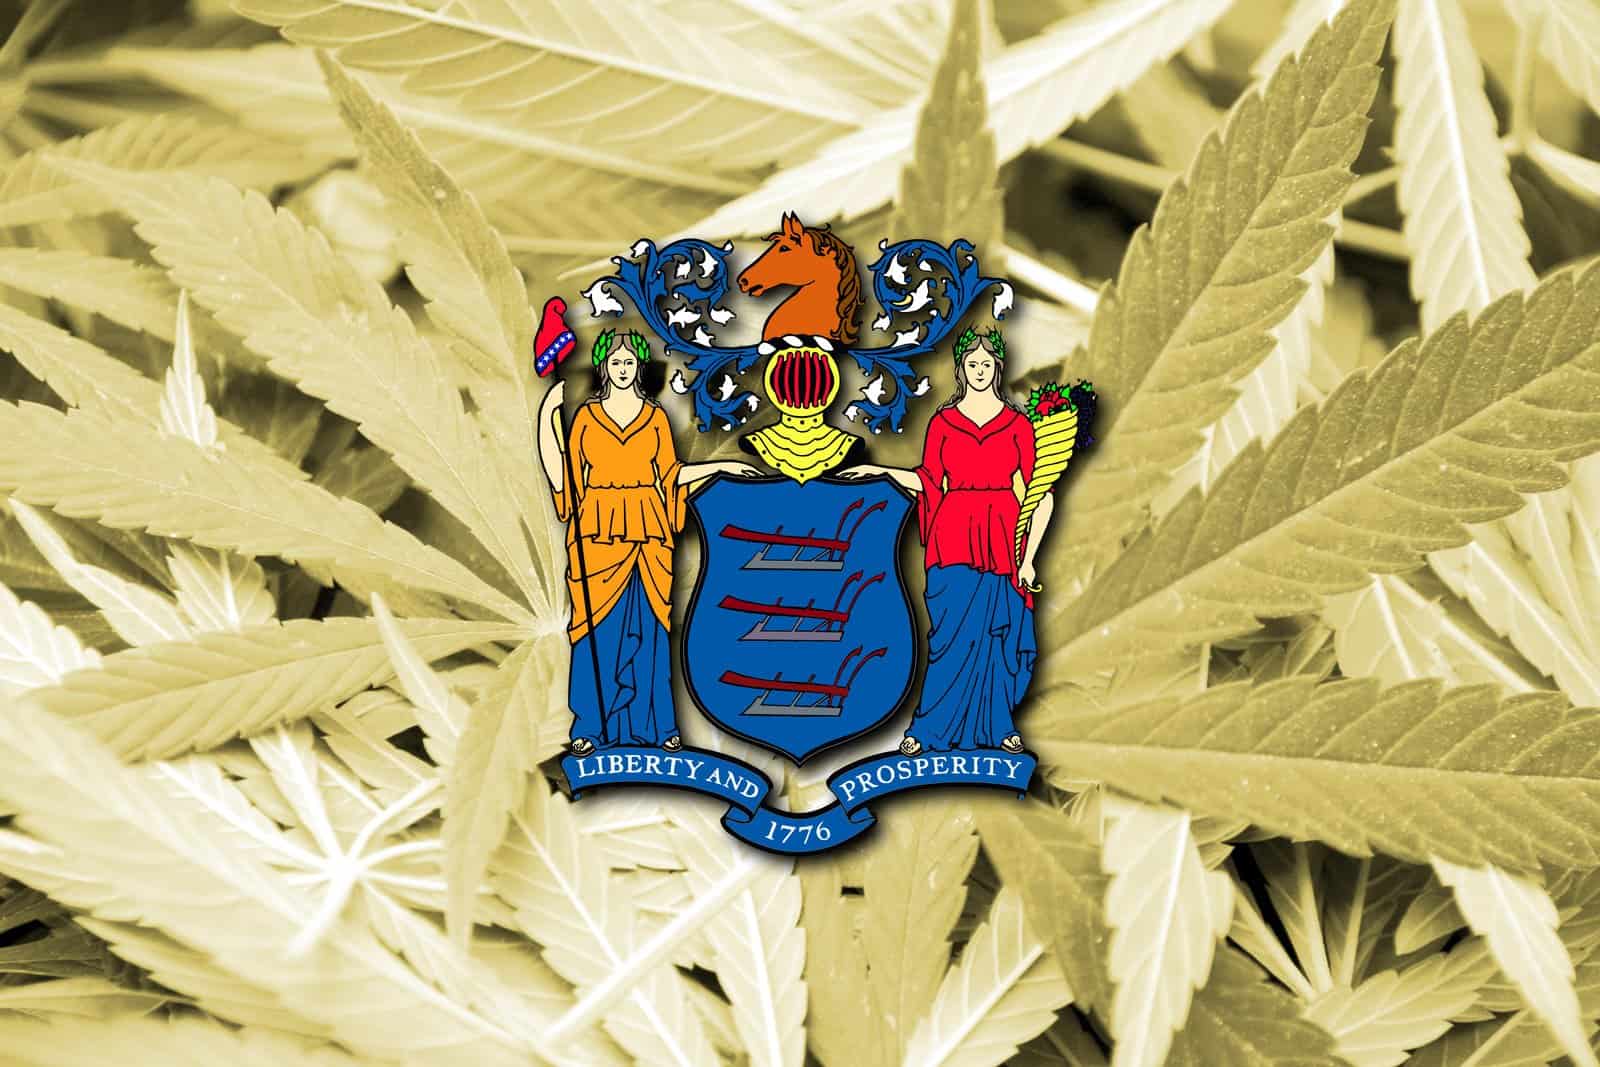 A Look at the Possibility For Legal Cannabis in New Jersey